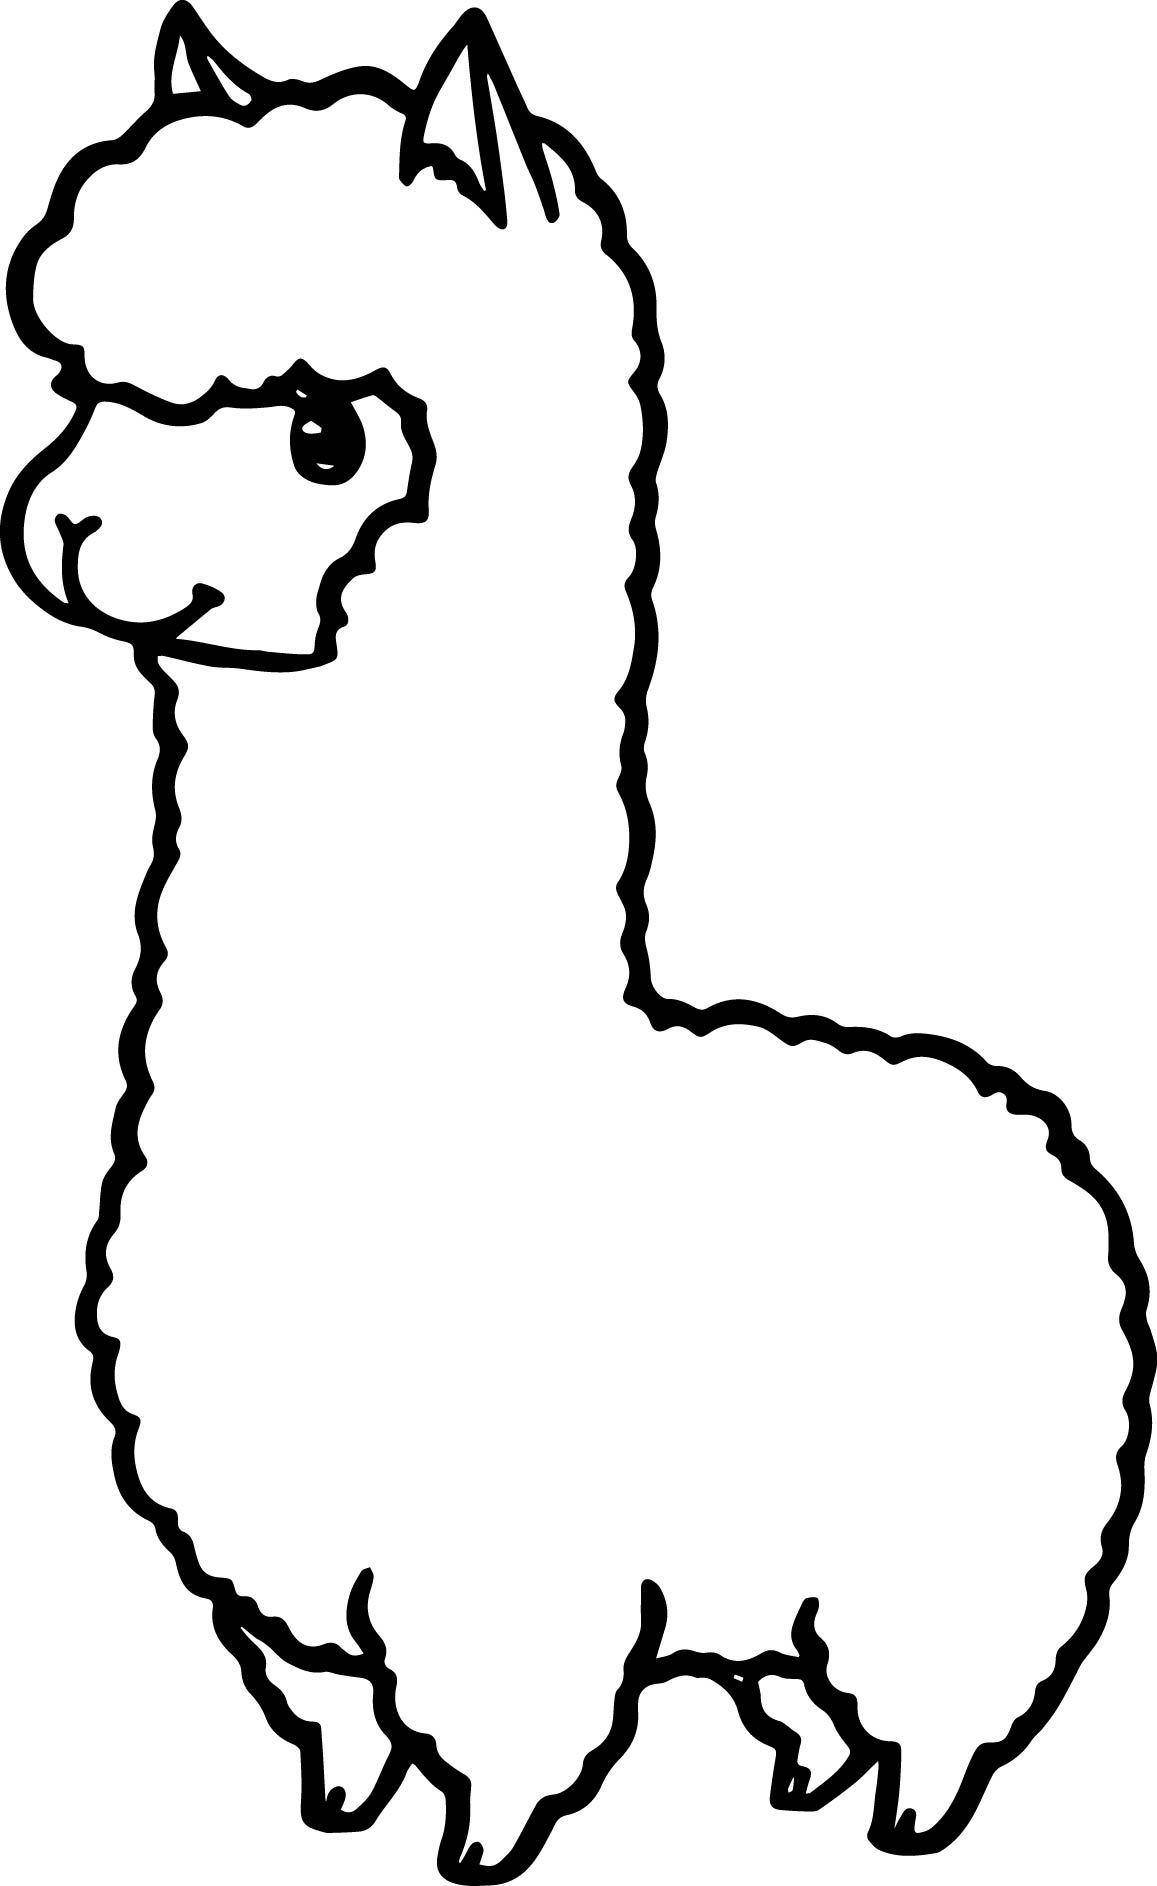 Llama Coloring Pages   Best Coloring Pages For Kids